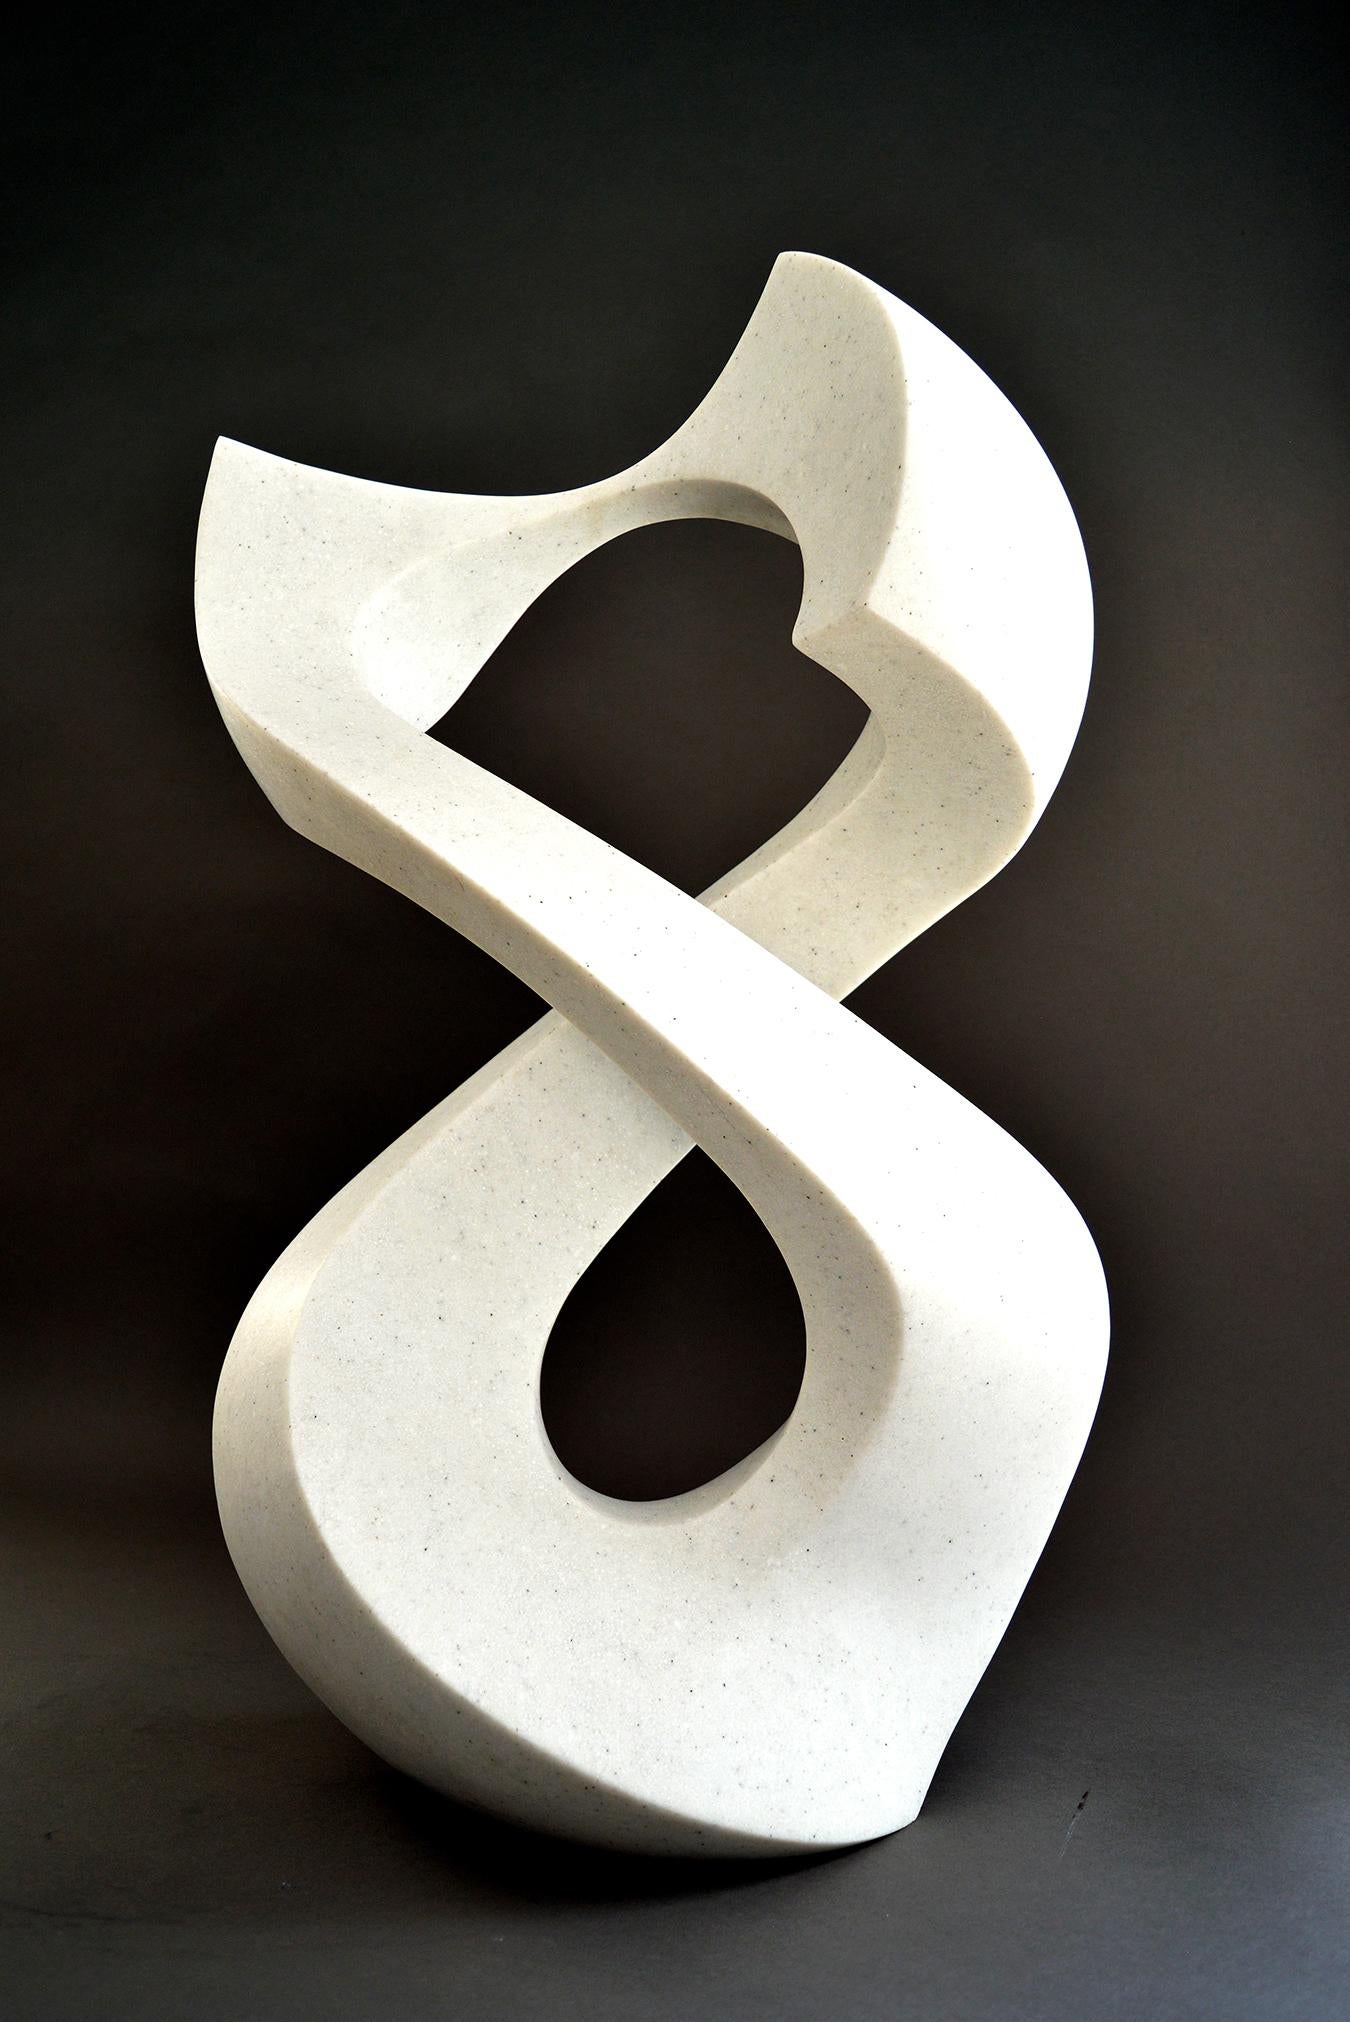 Halcyon White 3/50 - smooth, polished, abstract, engineered stone sculpture - Sculpture by Jeremy Guy